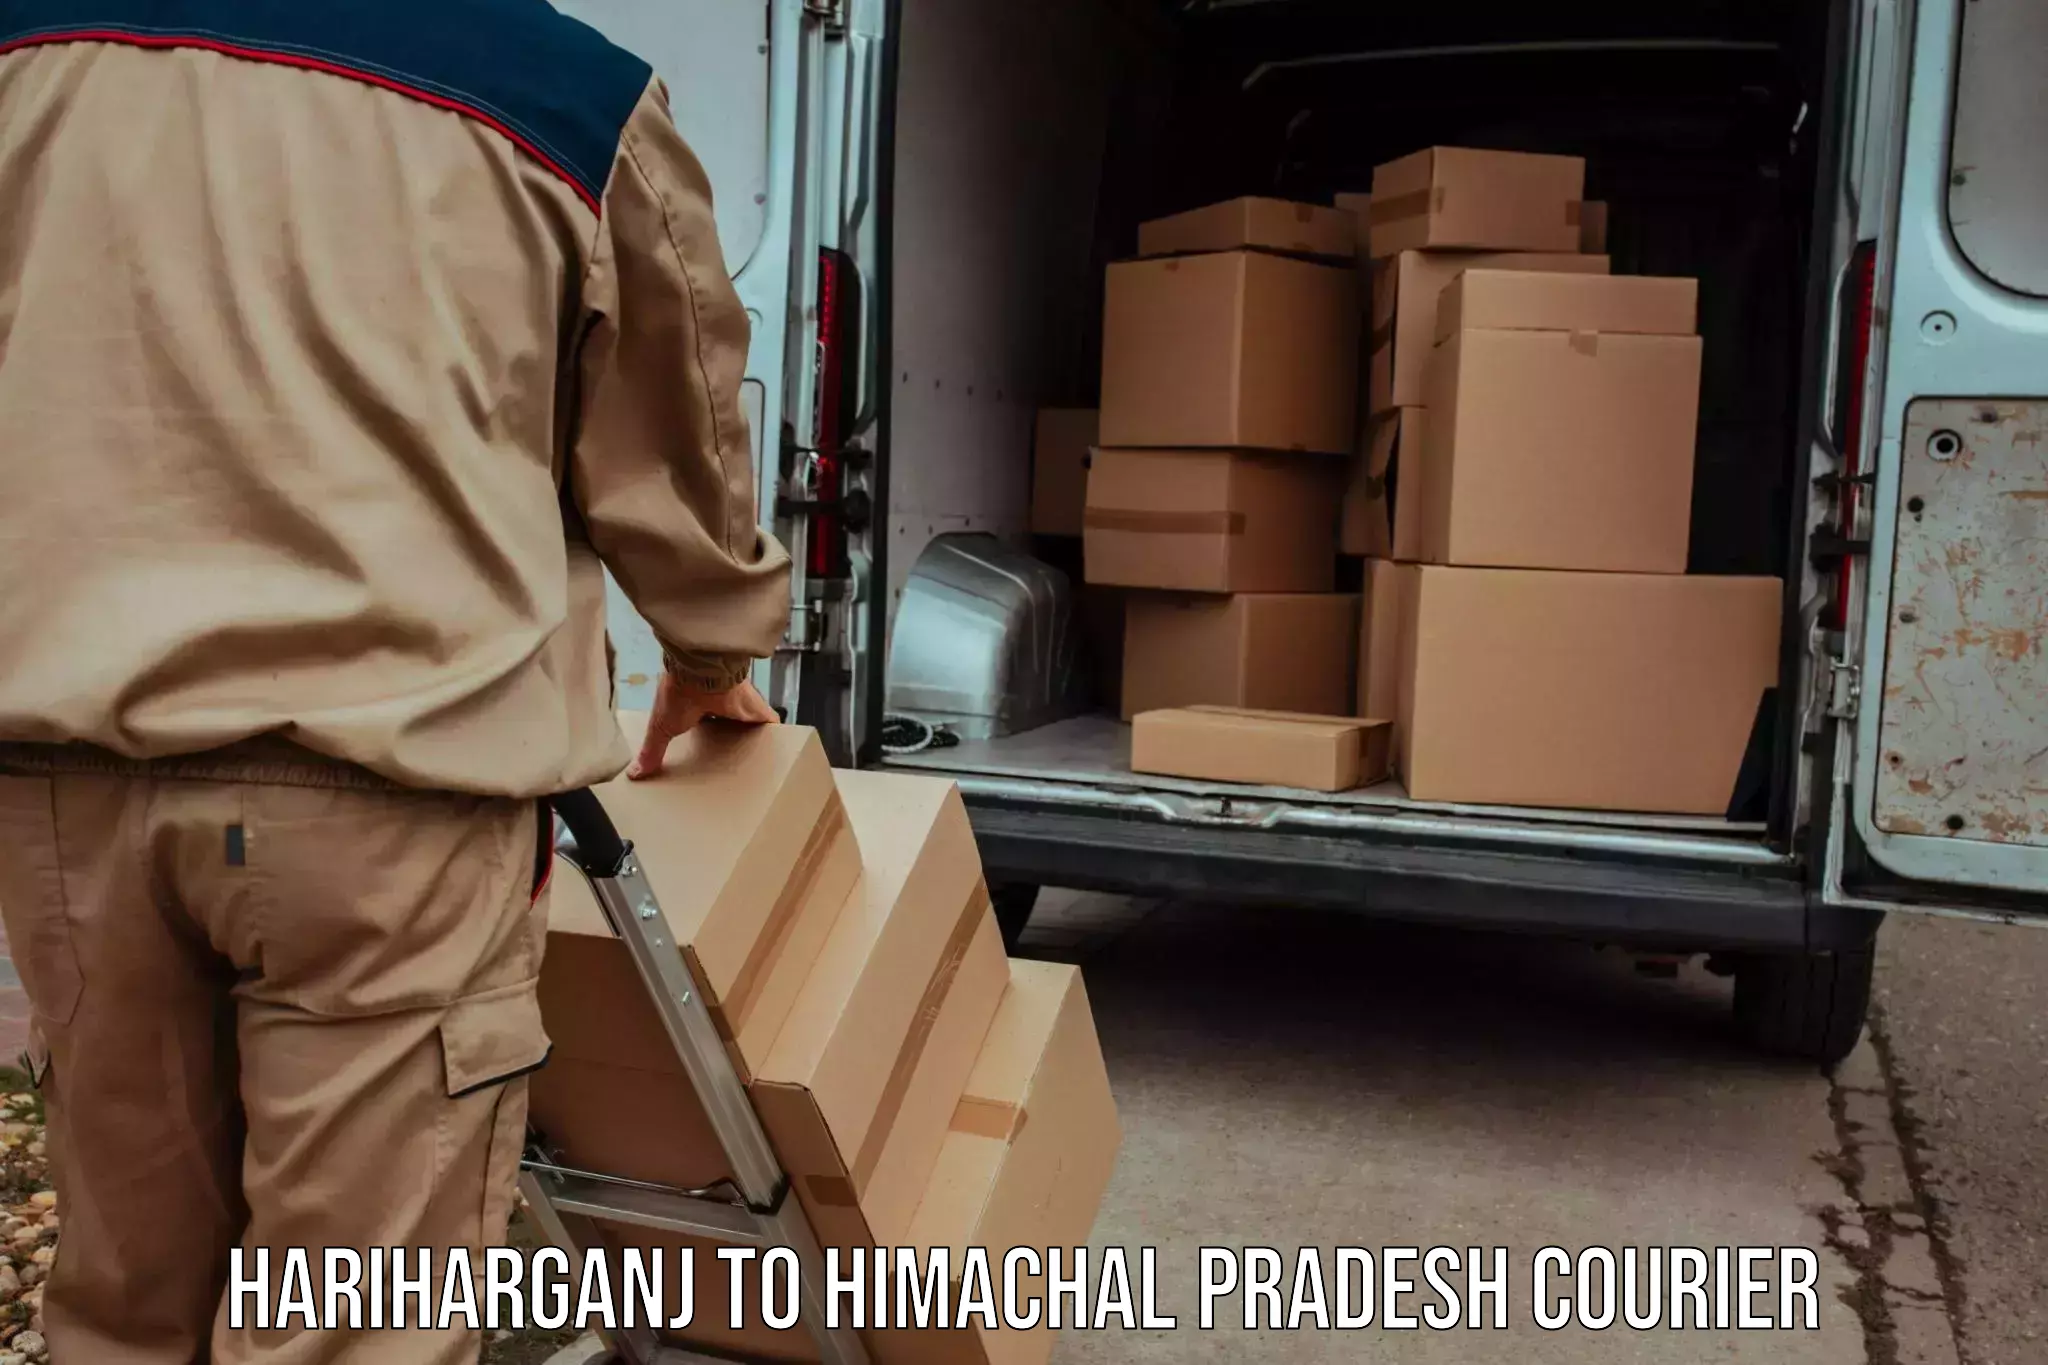 Next-day delivery options Hariharganj to Khundian